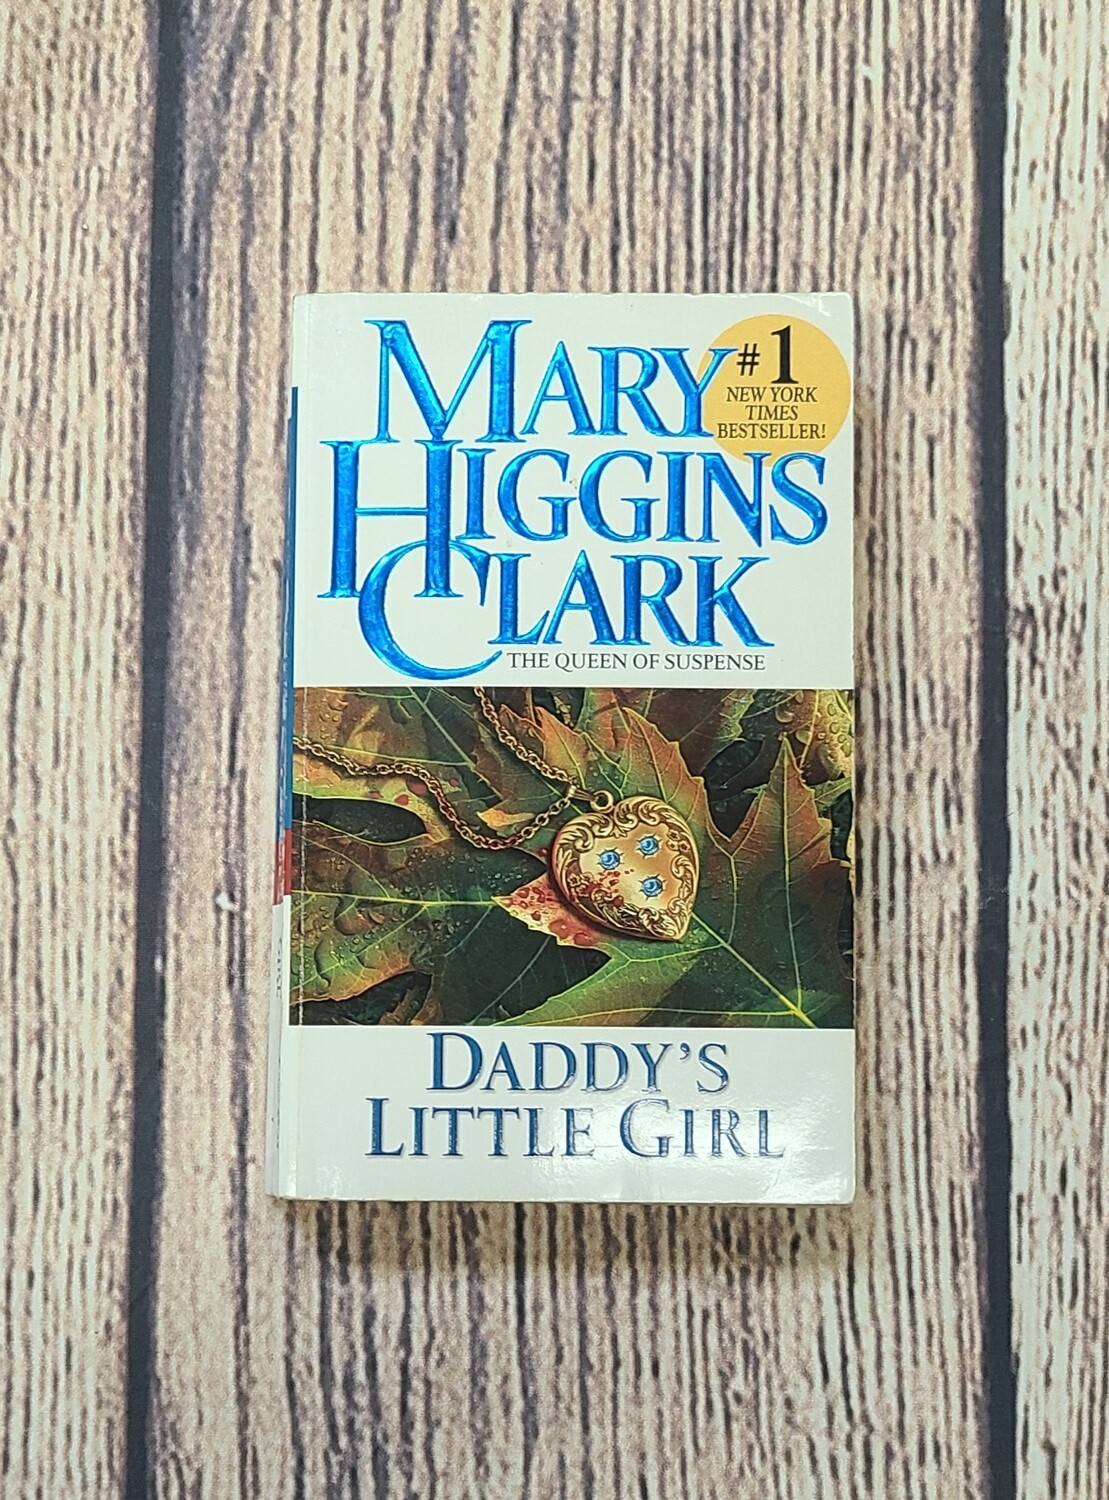 Daddy's Little Girl by Mary Higgins Clark